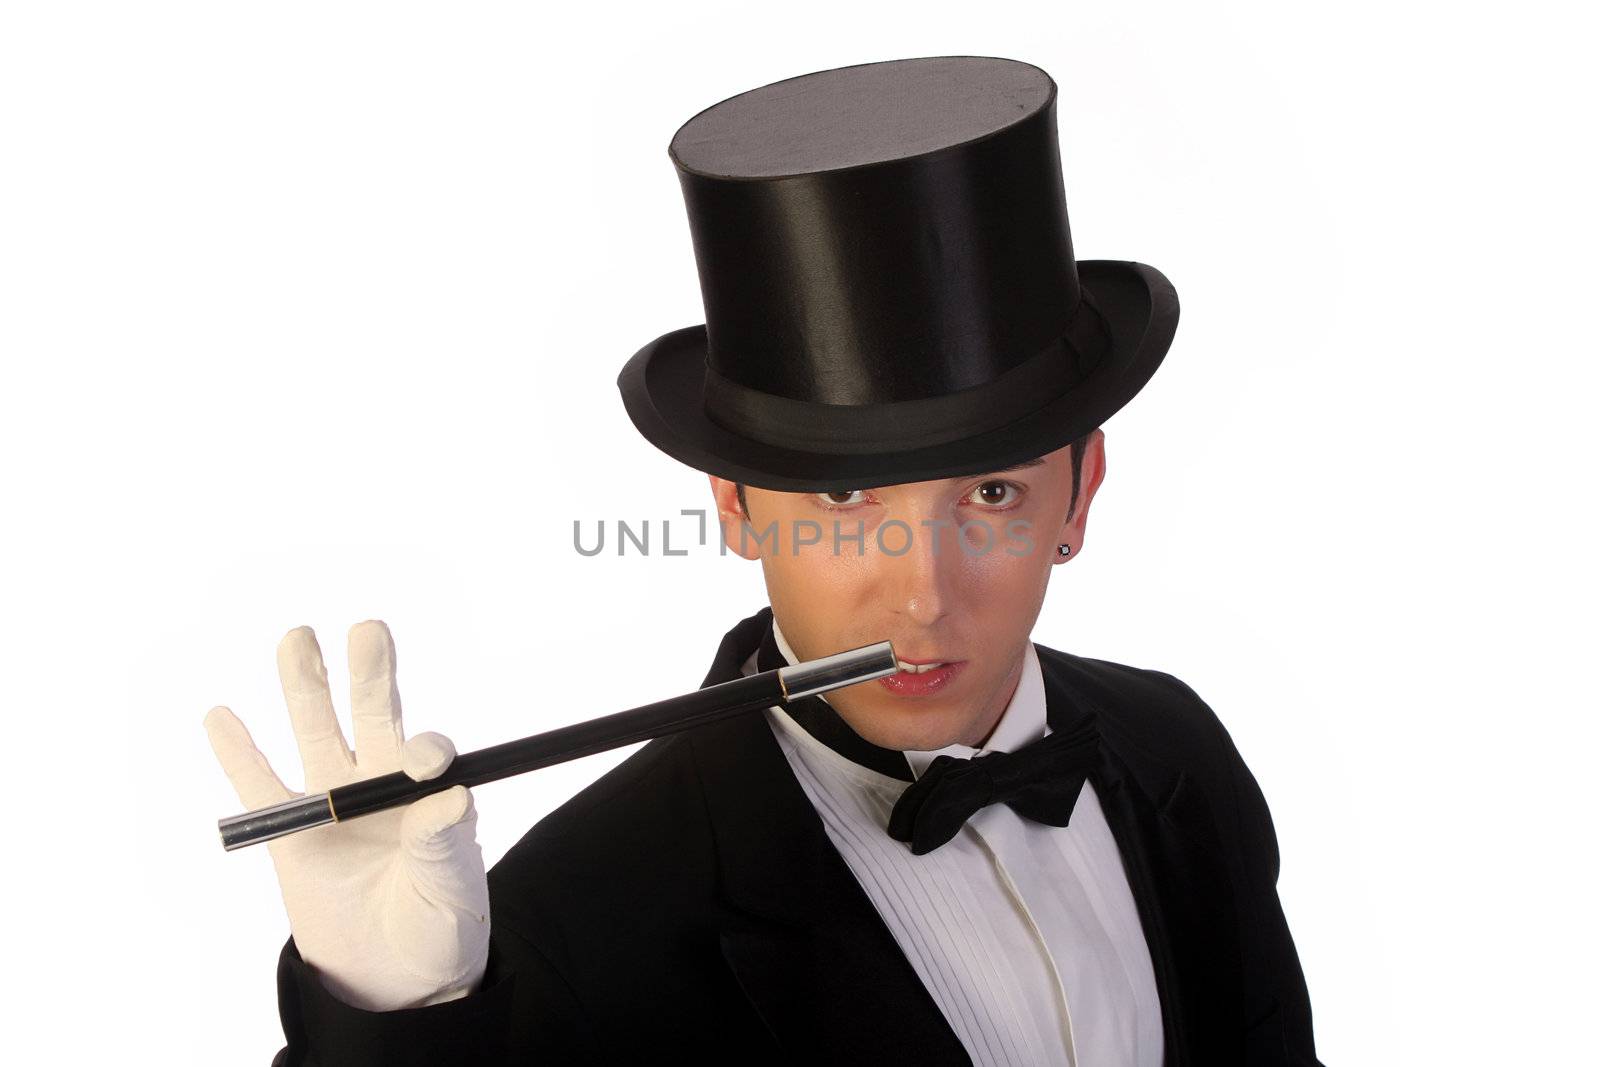 young magician performing with wand on white background